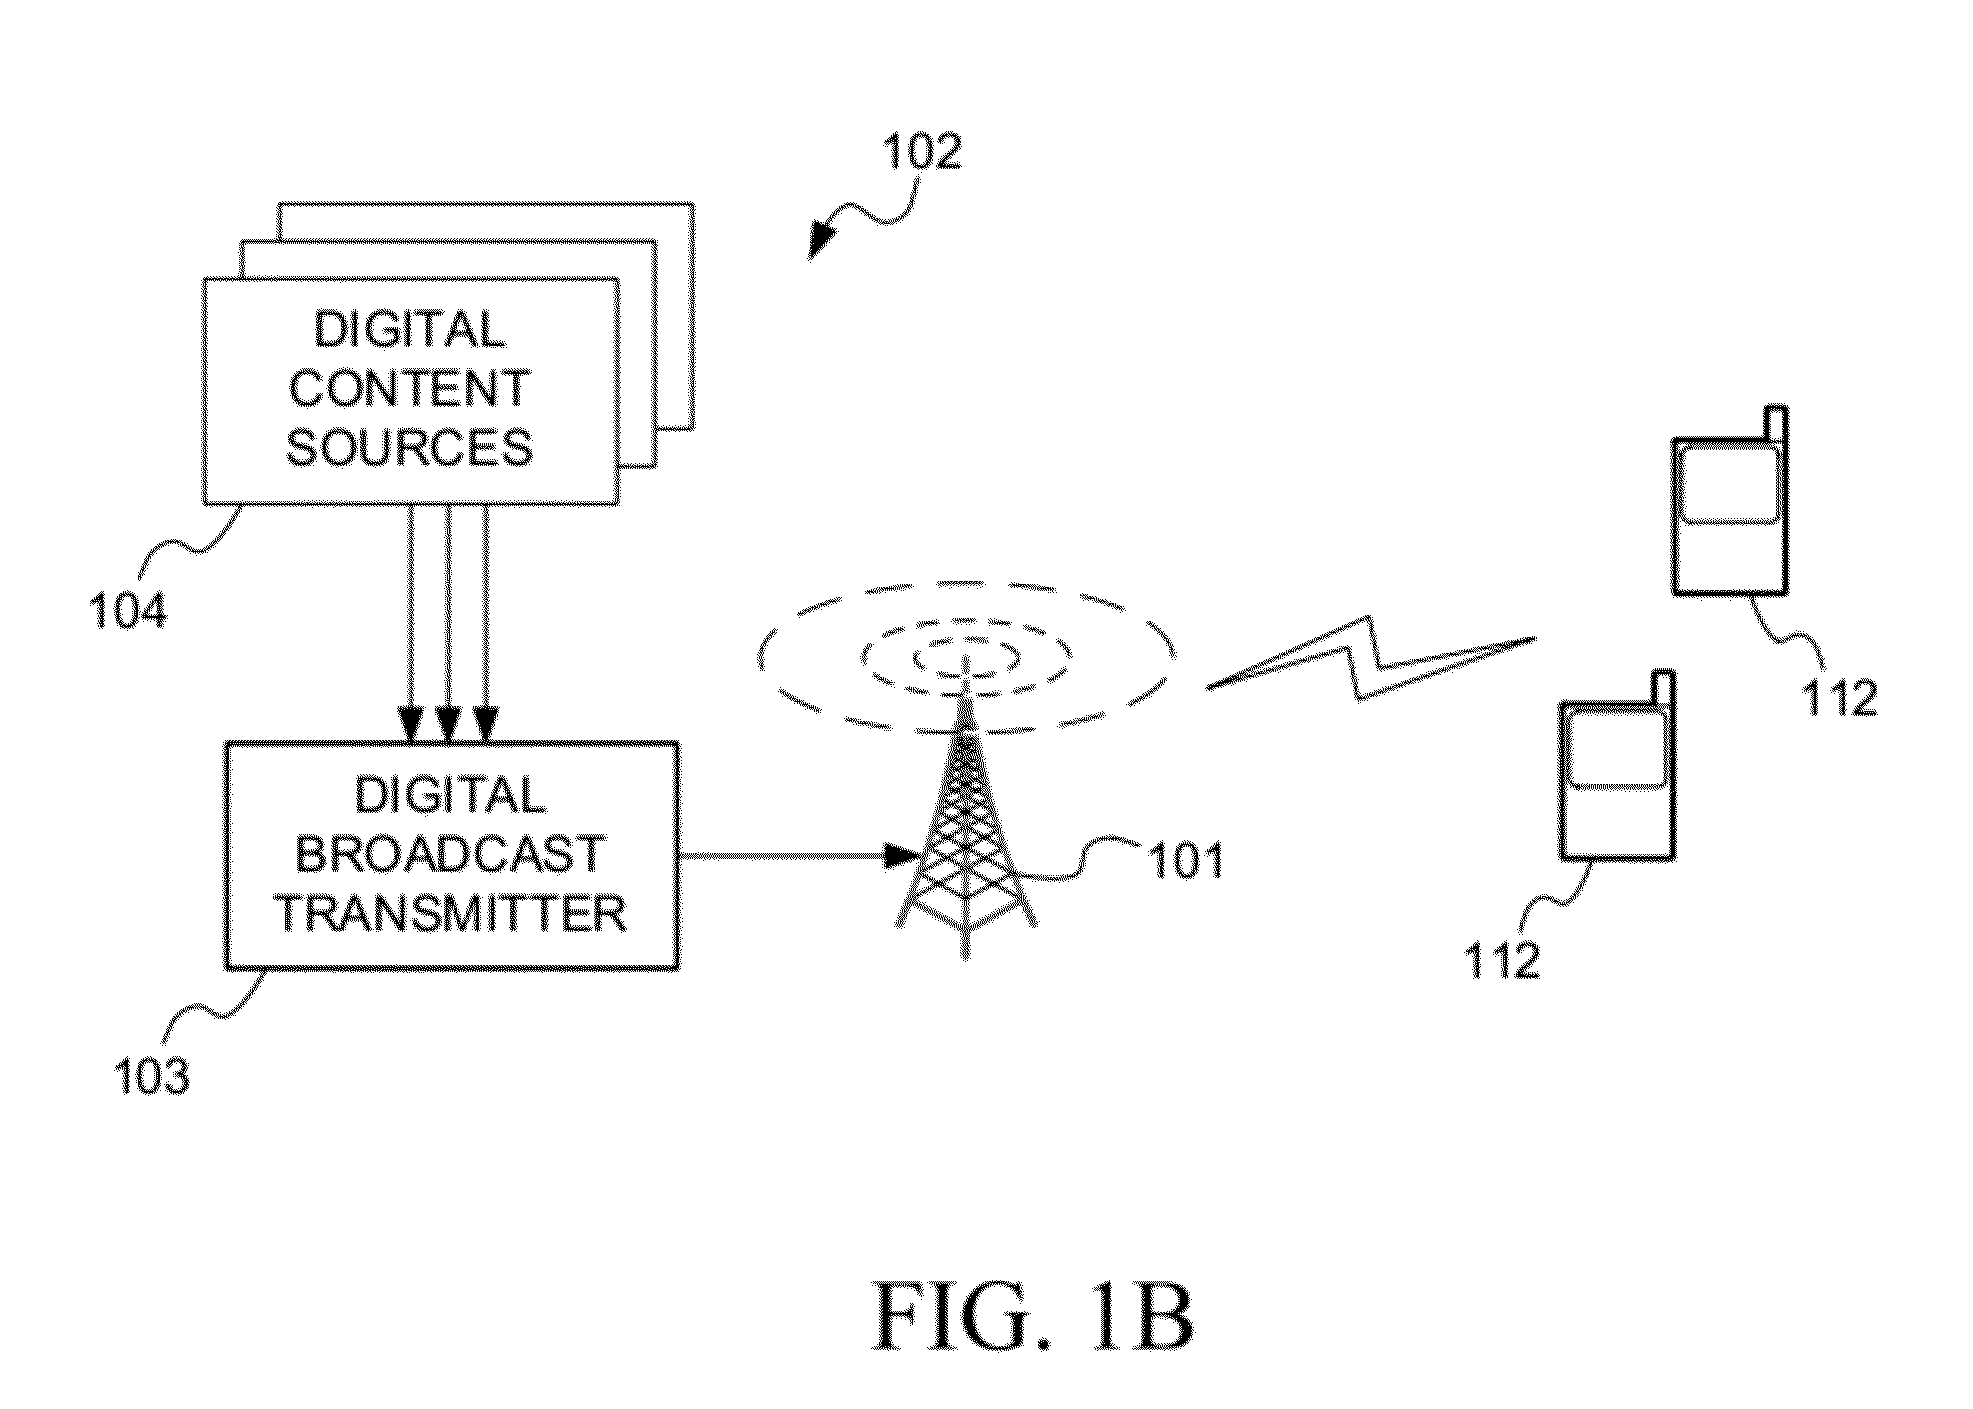 Providing Signaling Information in an Electronic Service Guide